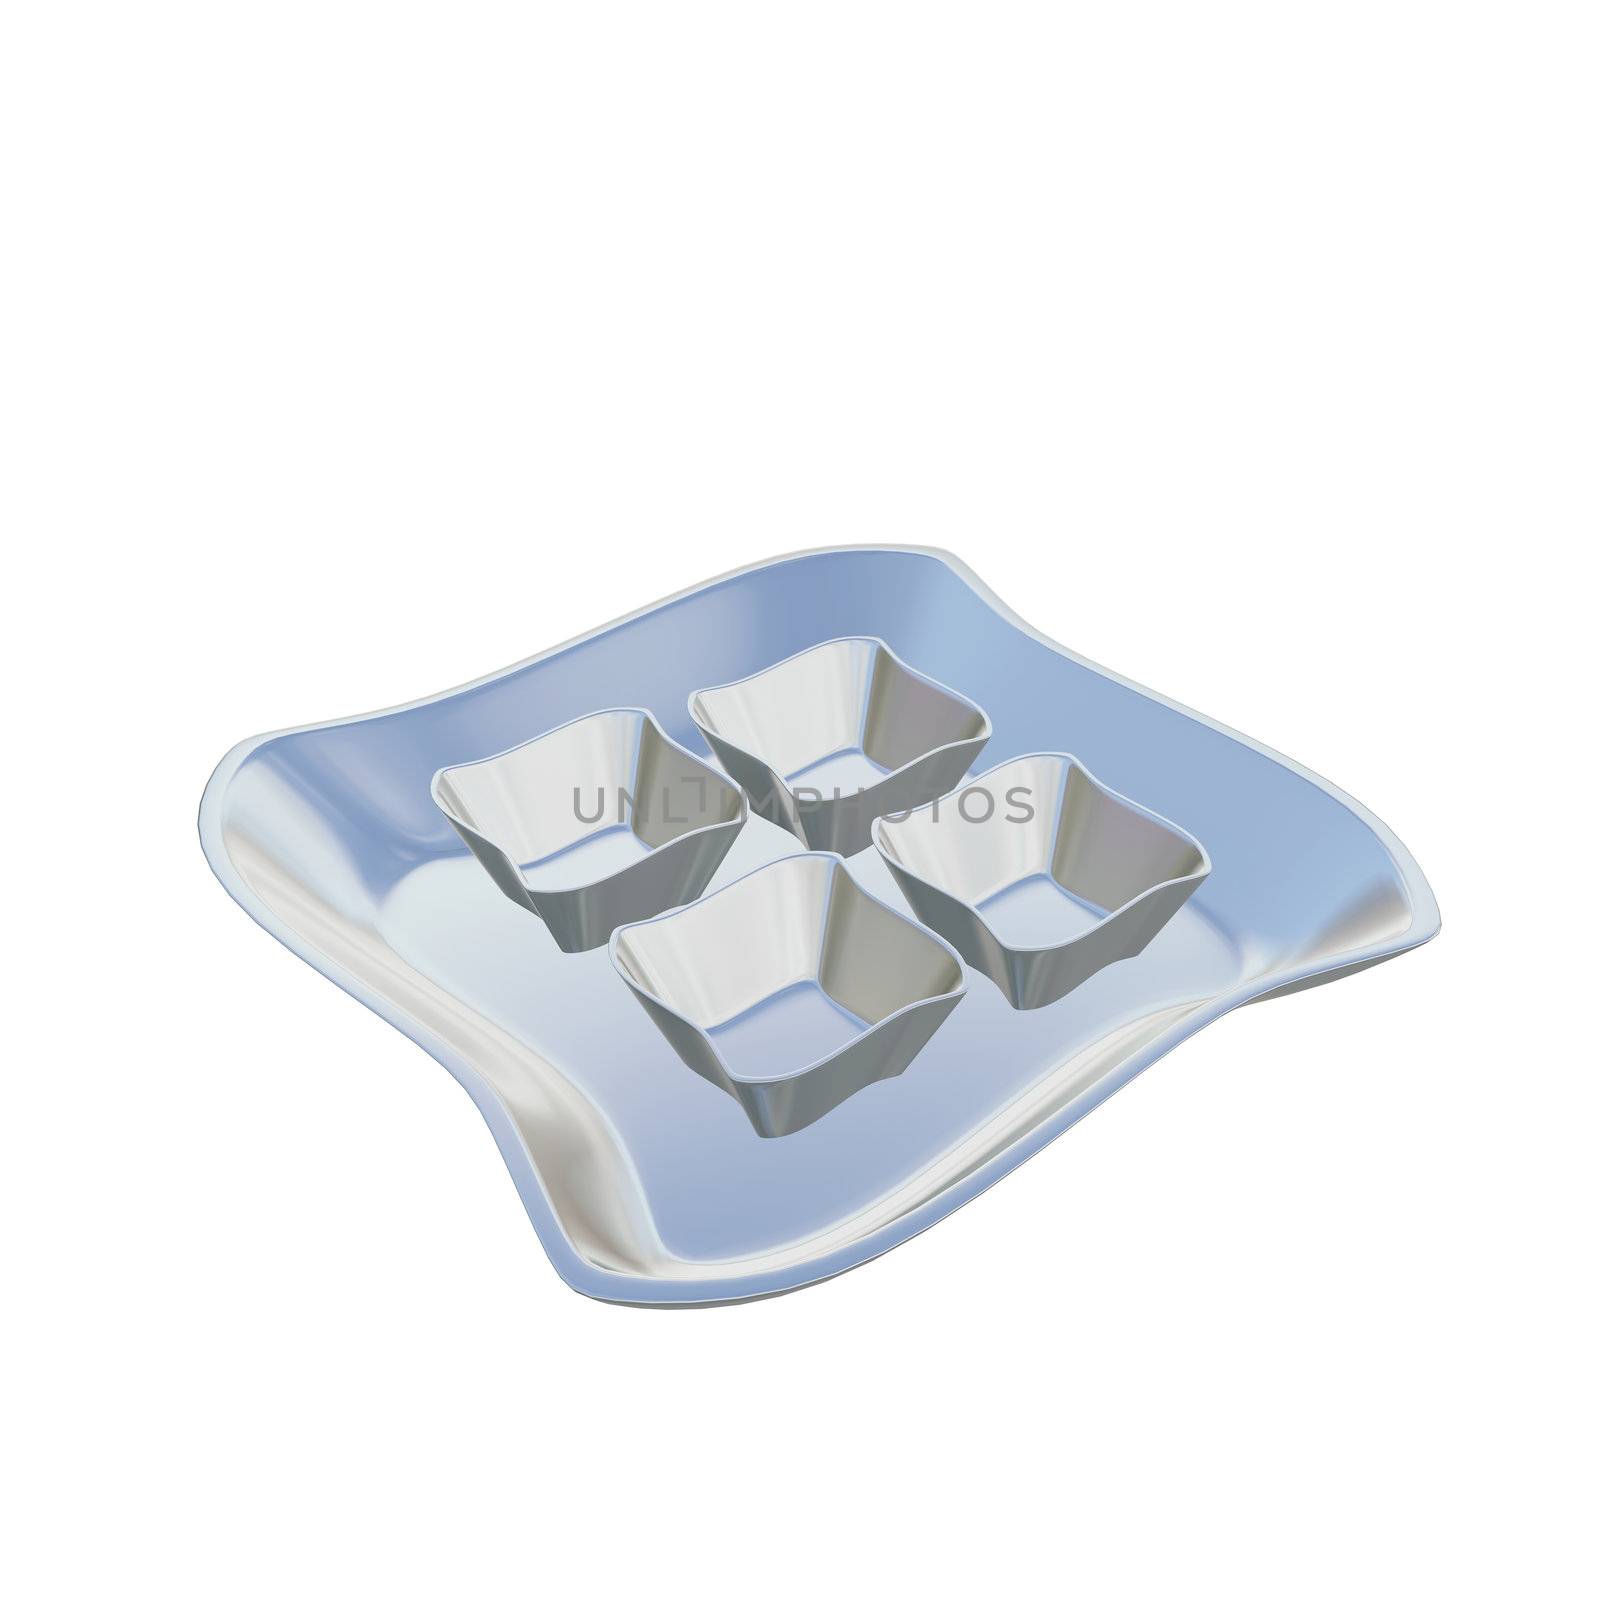 Fancy shaped stainless steel serving dishes, 3D illustration by Morphart